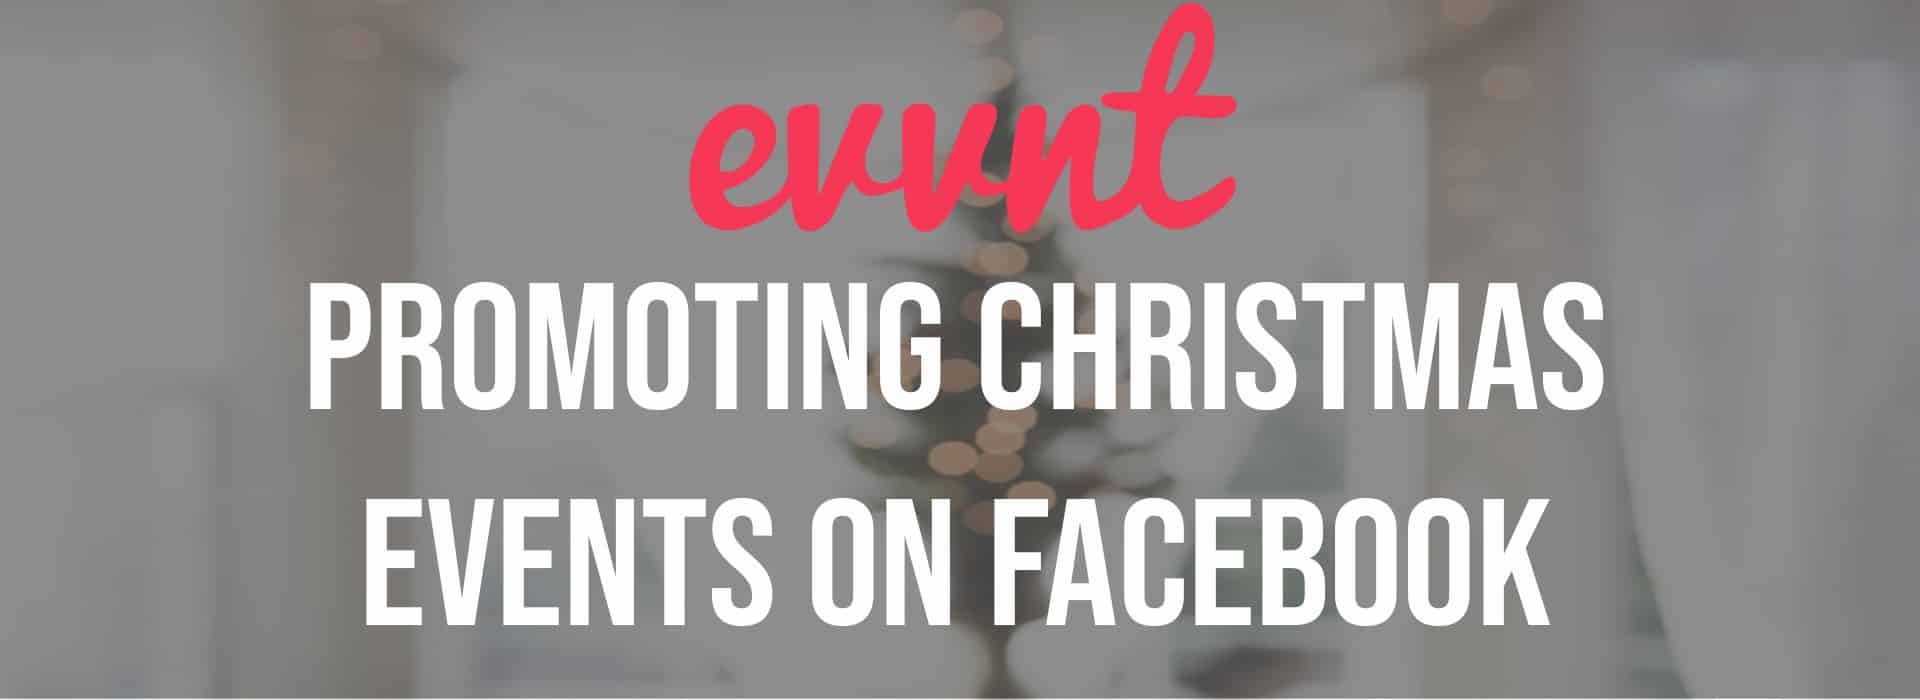 Promoting Christmas Events on Facebook